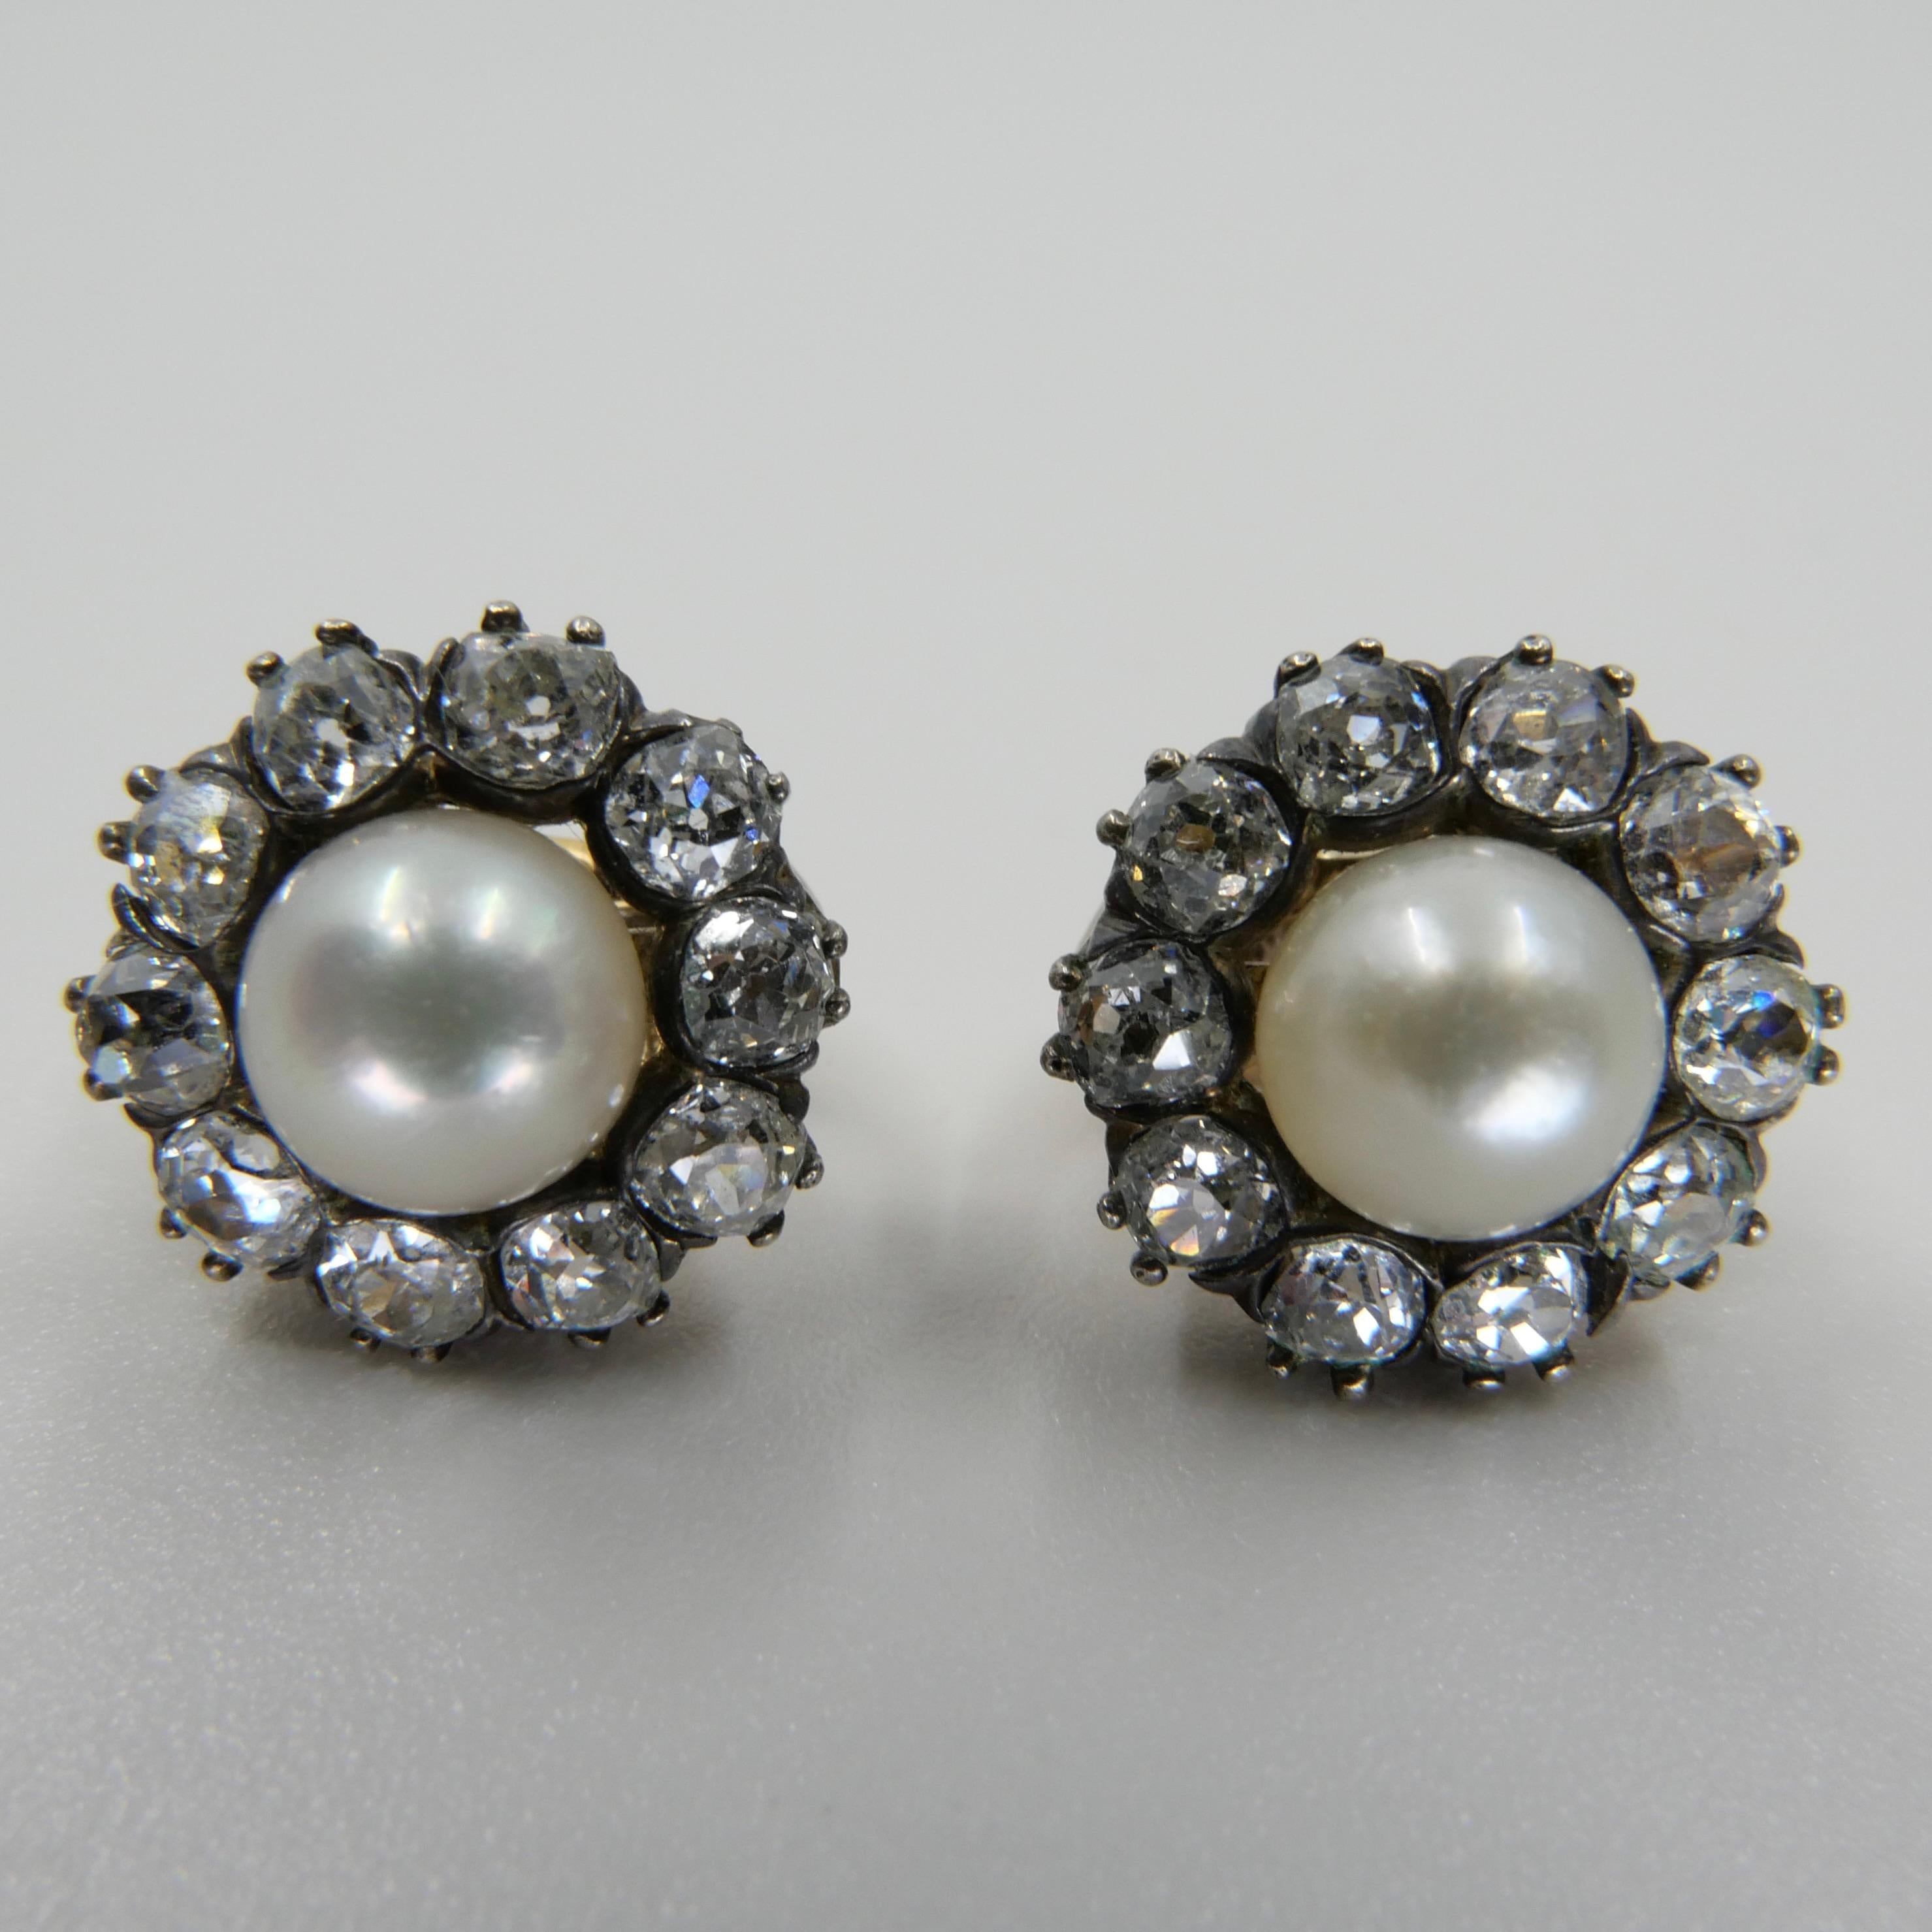 Antique Natural Pearl & Old Cut Diamond Earrings. French Assay & Maker Mark. 3